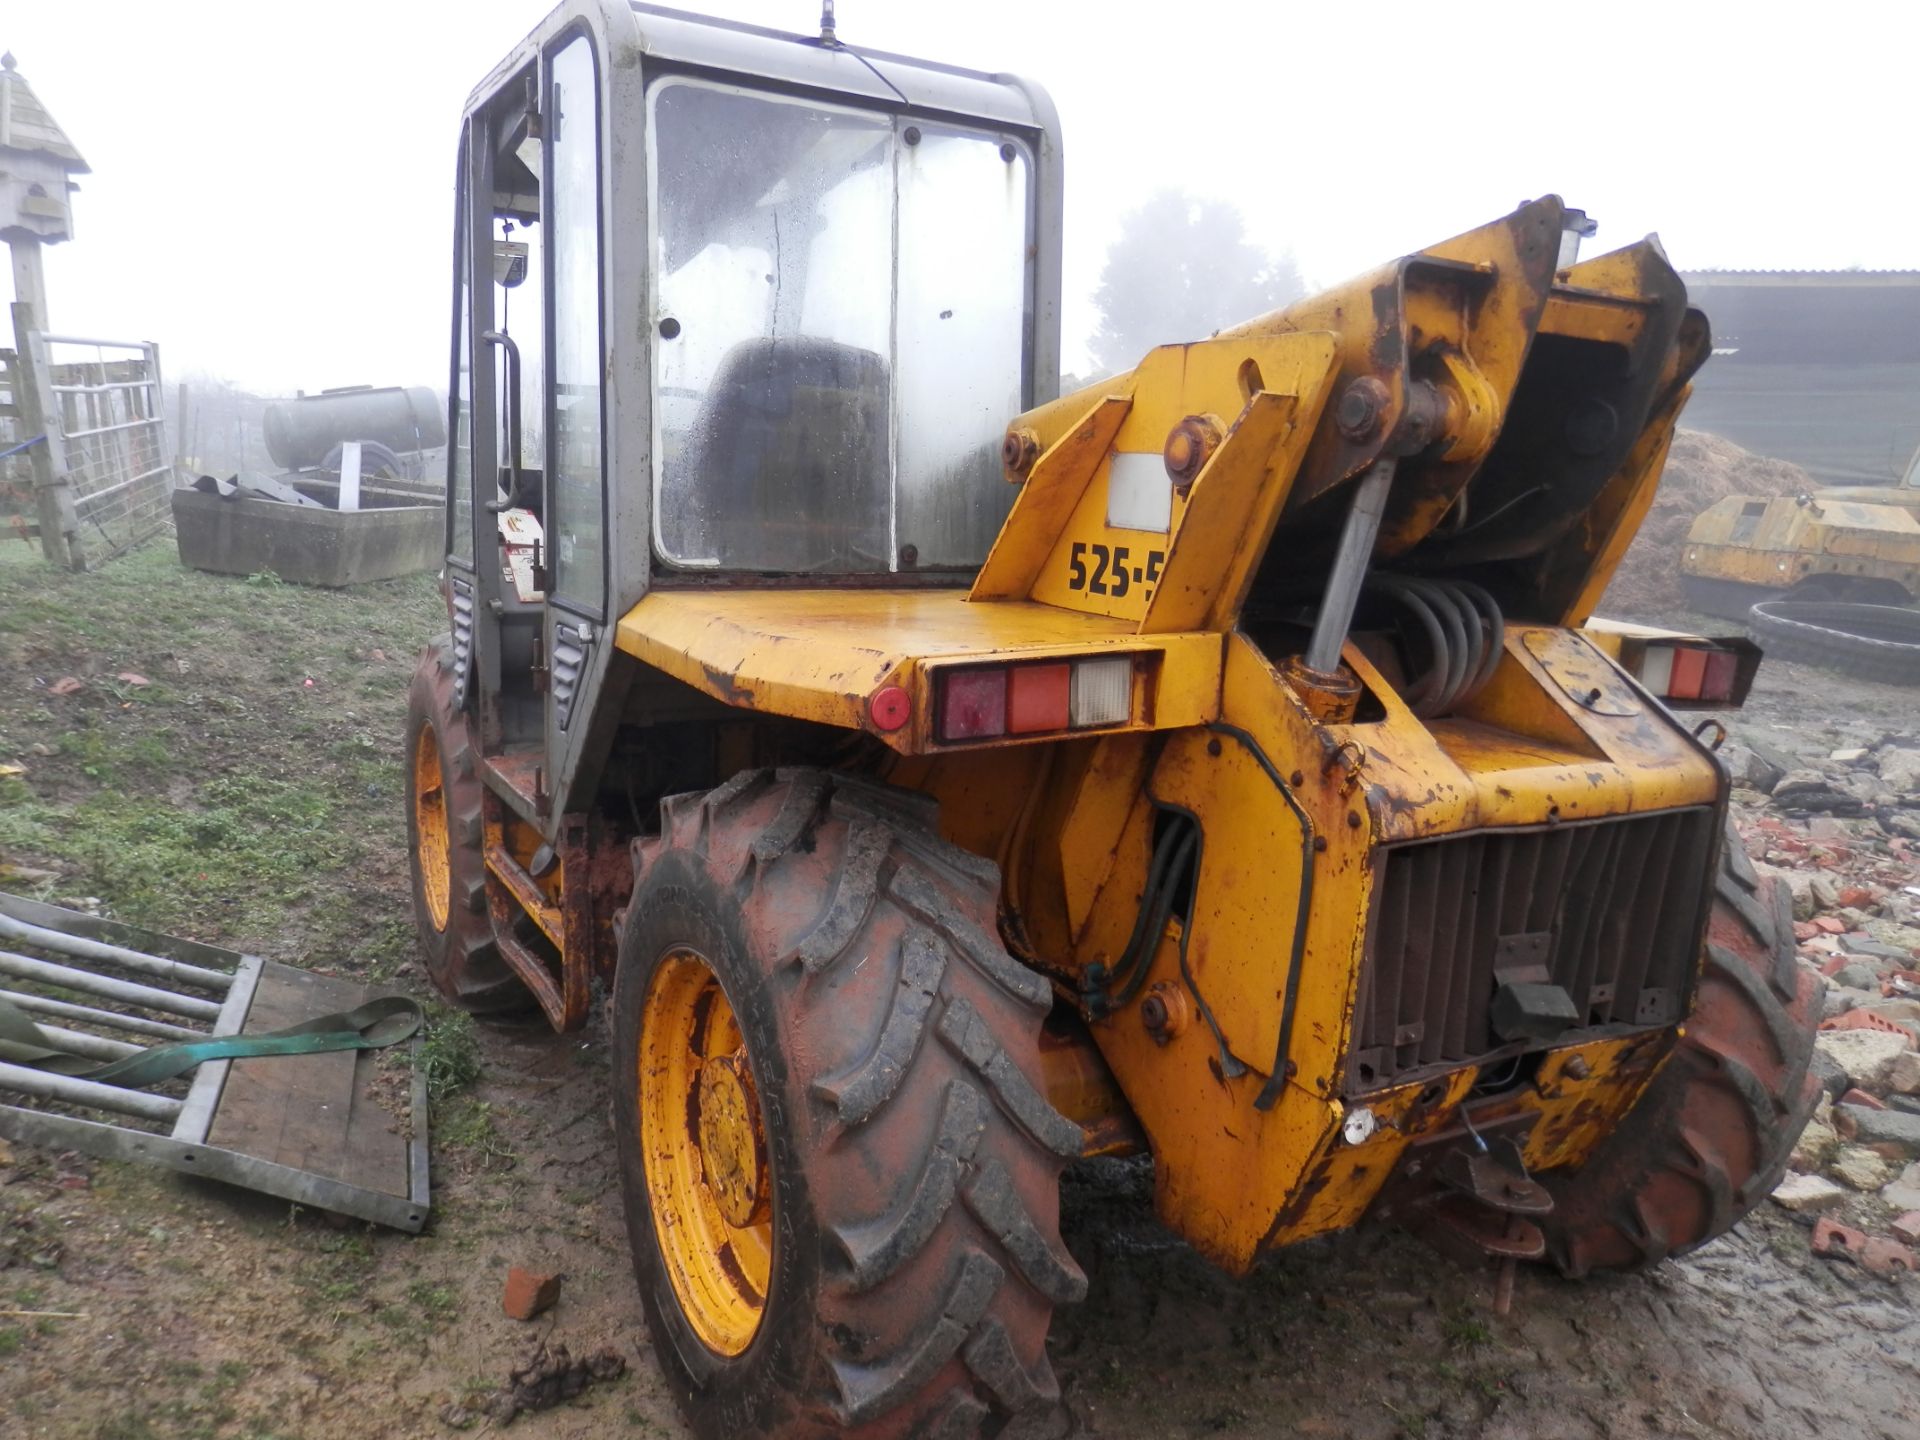 1994 JCB 525-58 LOAD ALL FARM SPECIAL TELE HANDLER. WORKING UNIT - Image 3 of 9